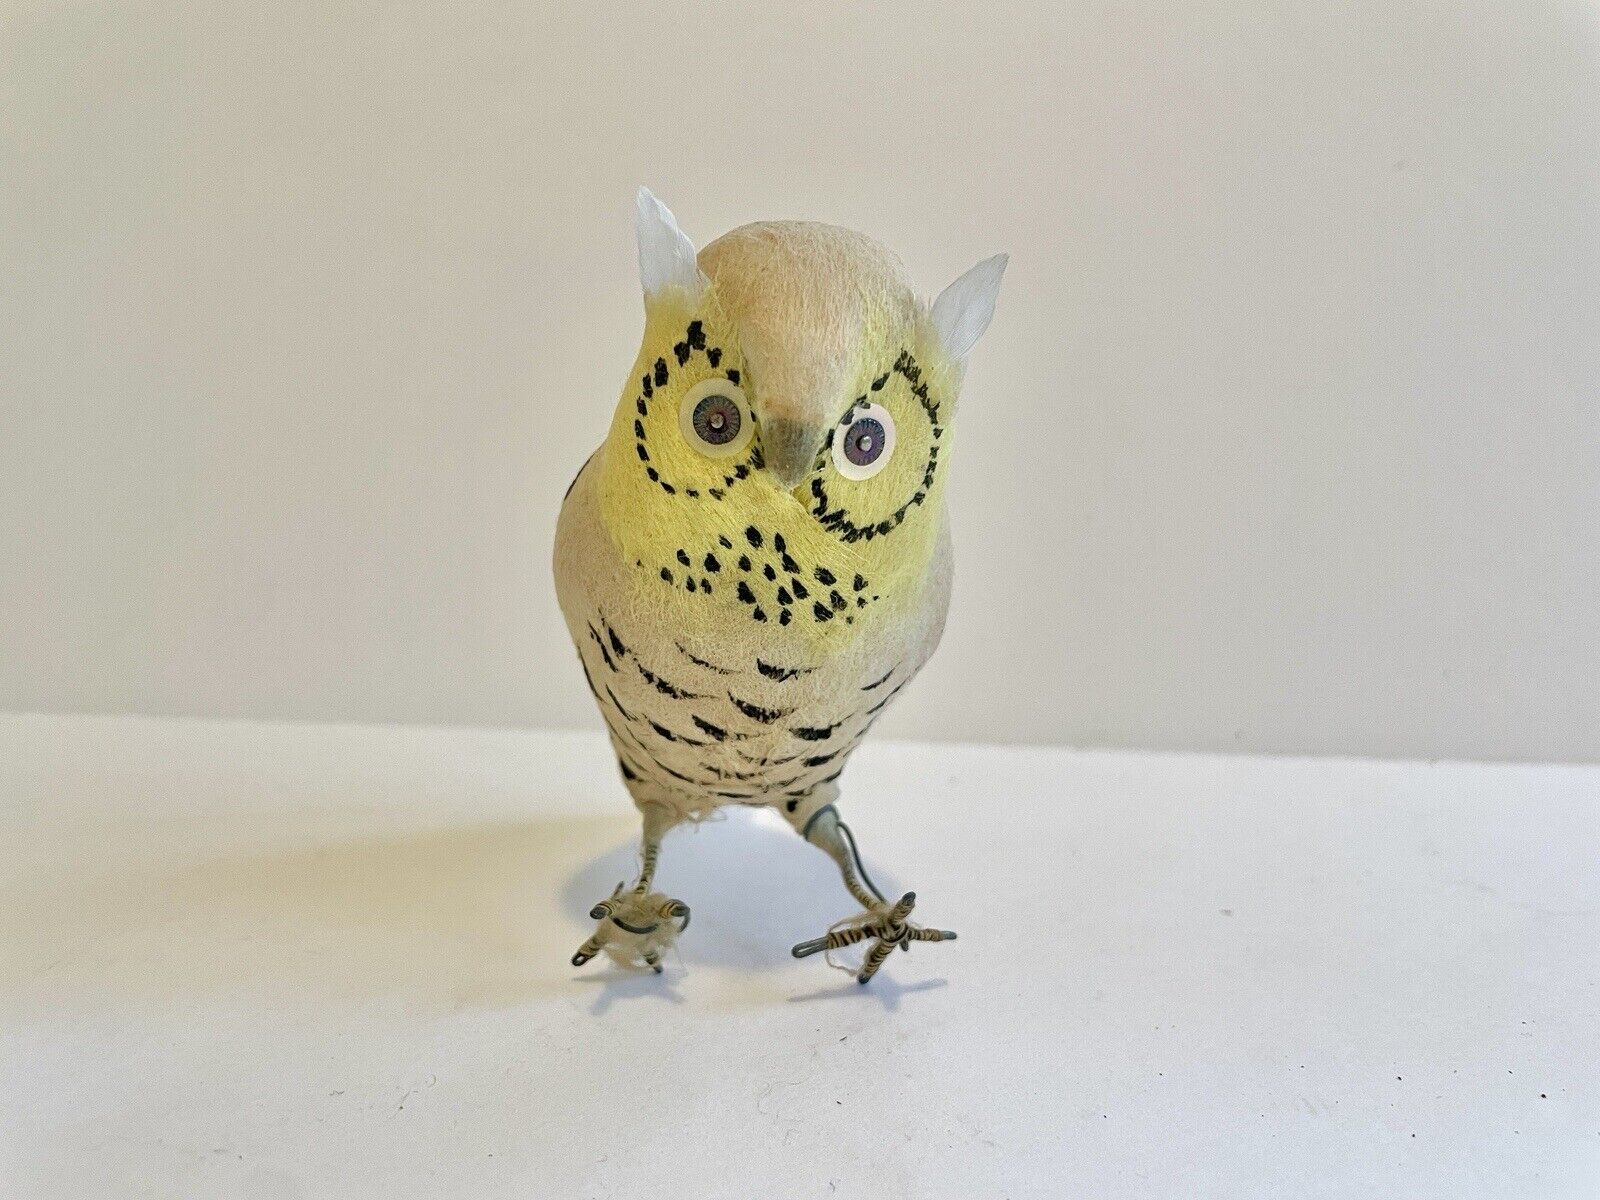 Vintage Hand Painted Owl Figurine Wire W/ Felted Batting & Feathers Yellow/Beige